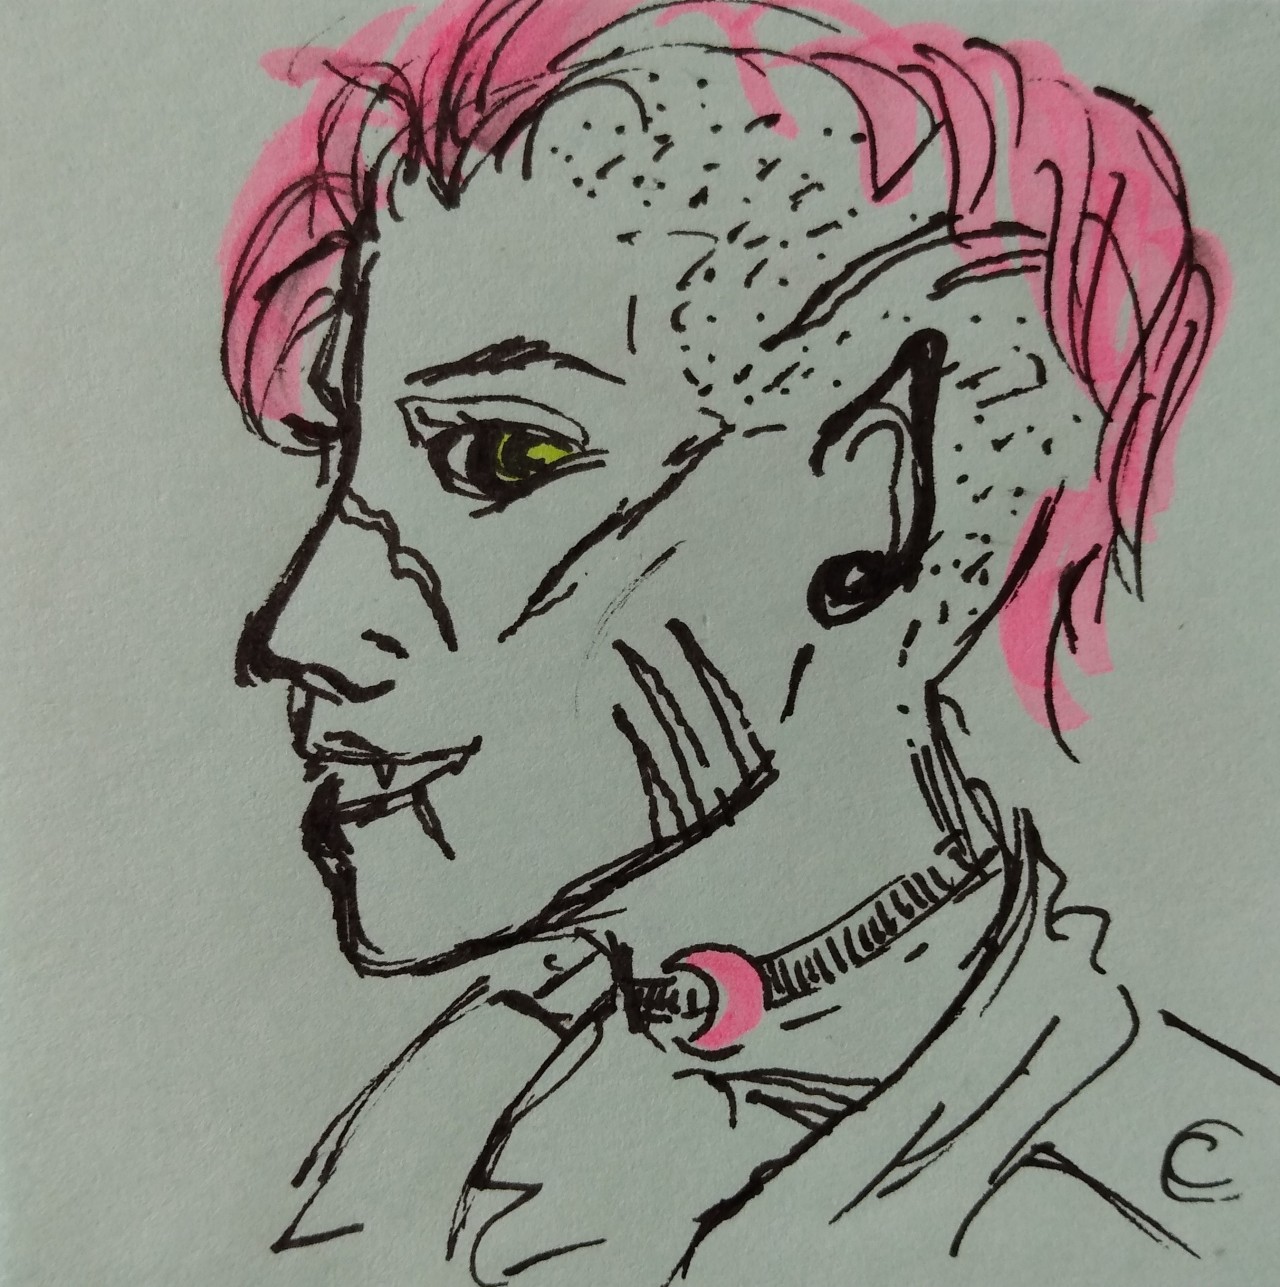 A doodle of Remus Lupin on a blue post-it note. He is in profile, on yellow eye looking at the viewer. He is smiling, showing pointed teeth. His hair is pink and he wears a pink half-moon choker.